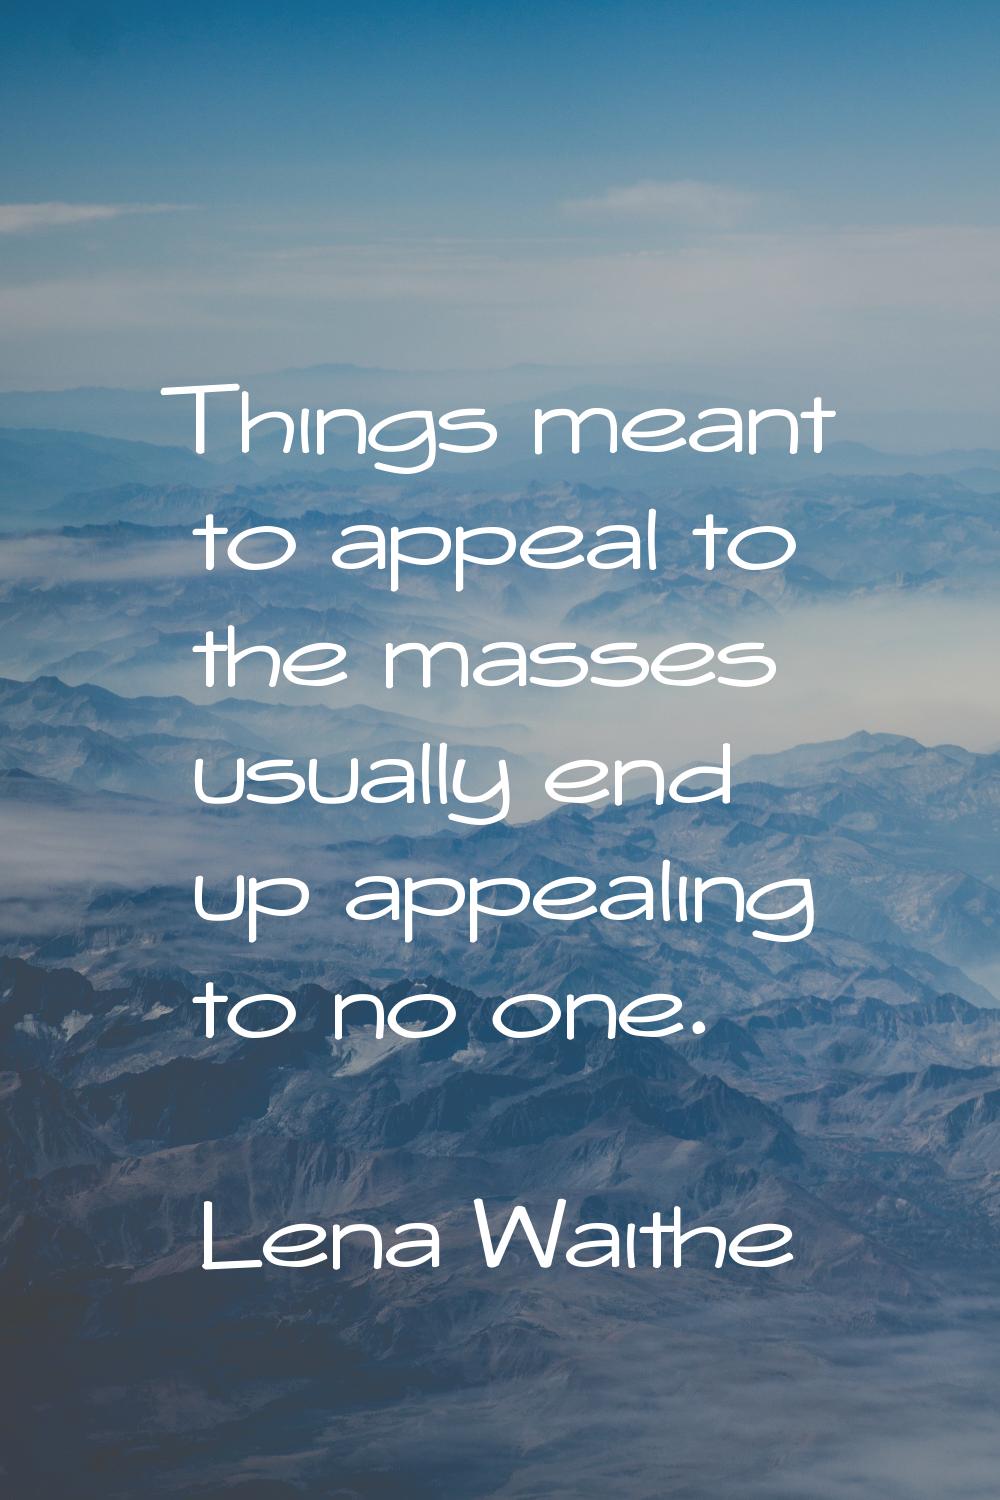 Things meant to appeal to the masses usually end up appealing to no one.